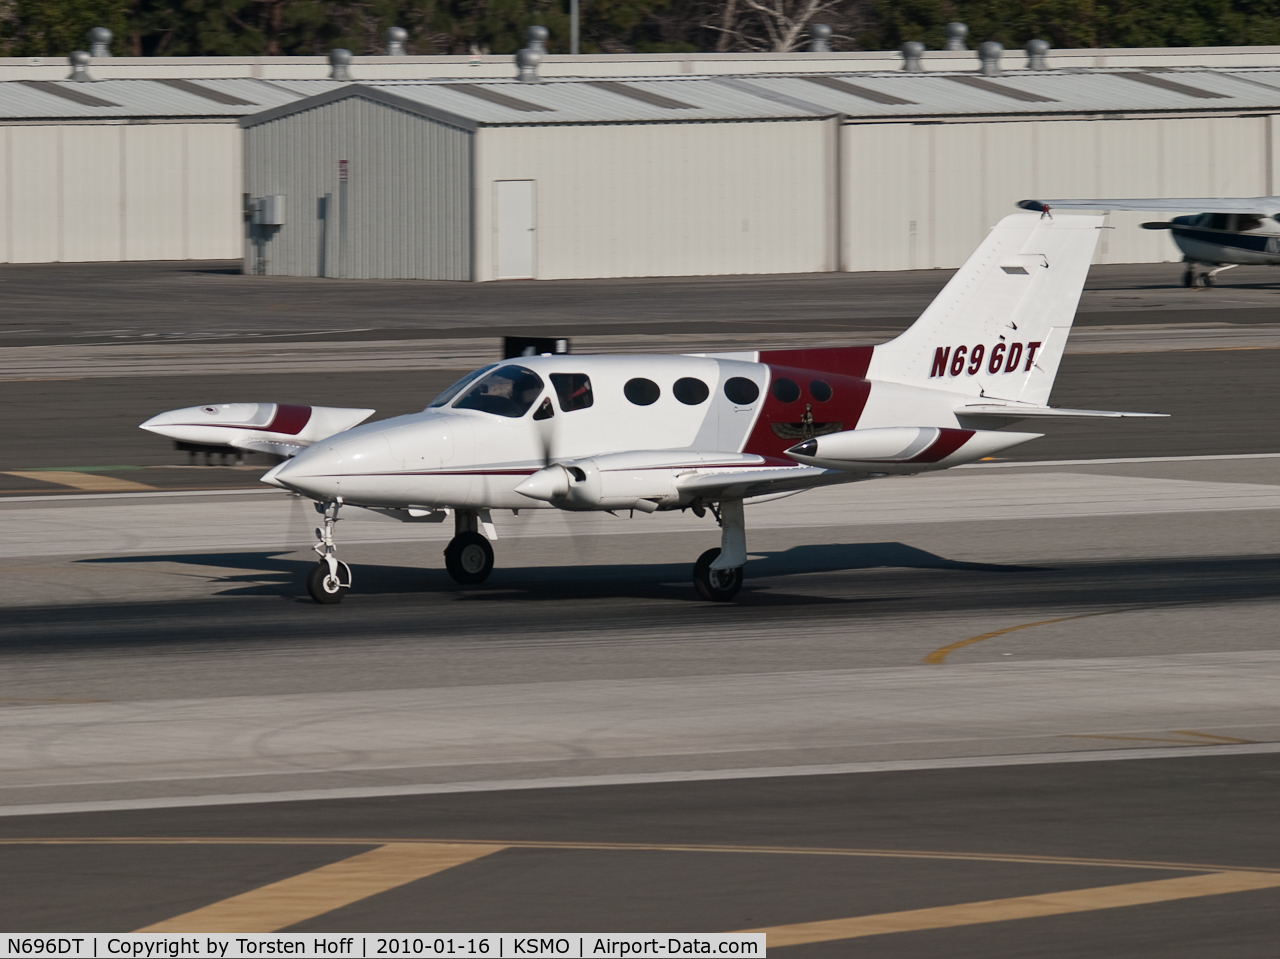 N696DT, 1973 Cessna 414 Chancellor Chancellor C/N 414-0370, N696DT departing from RWY 21